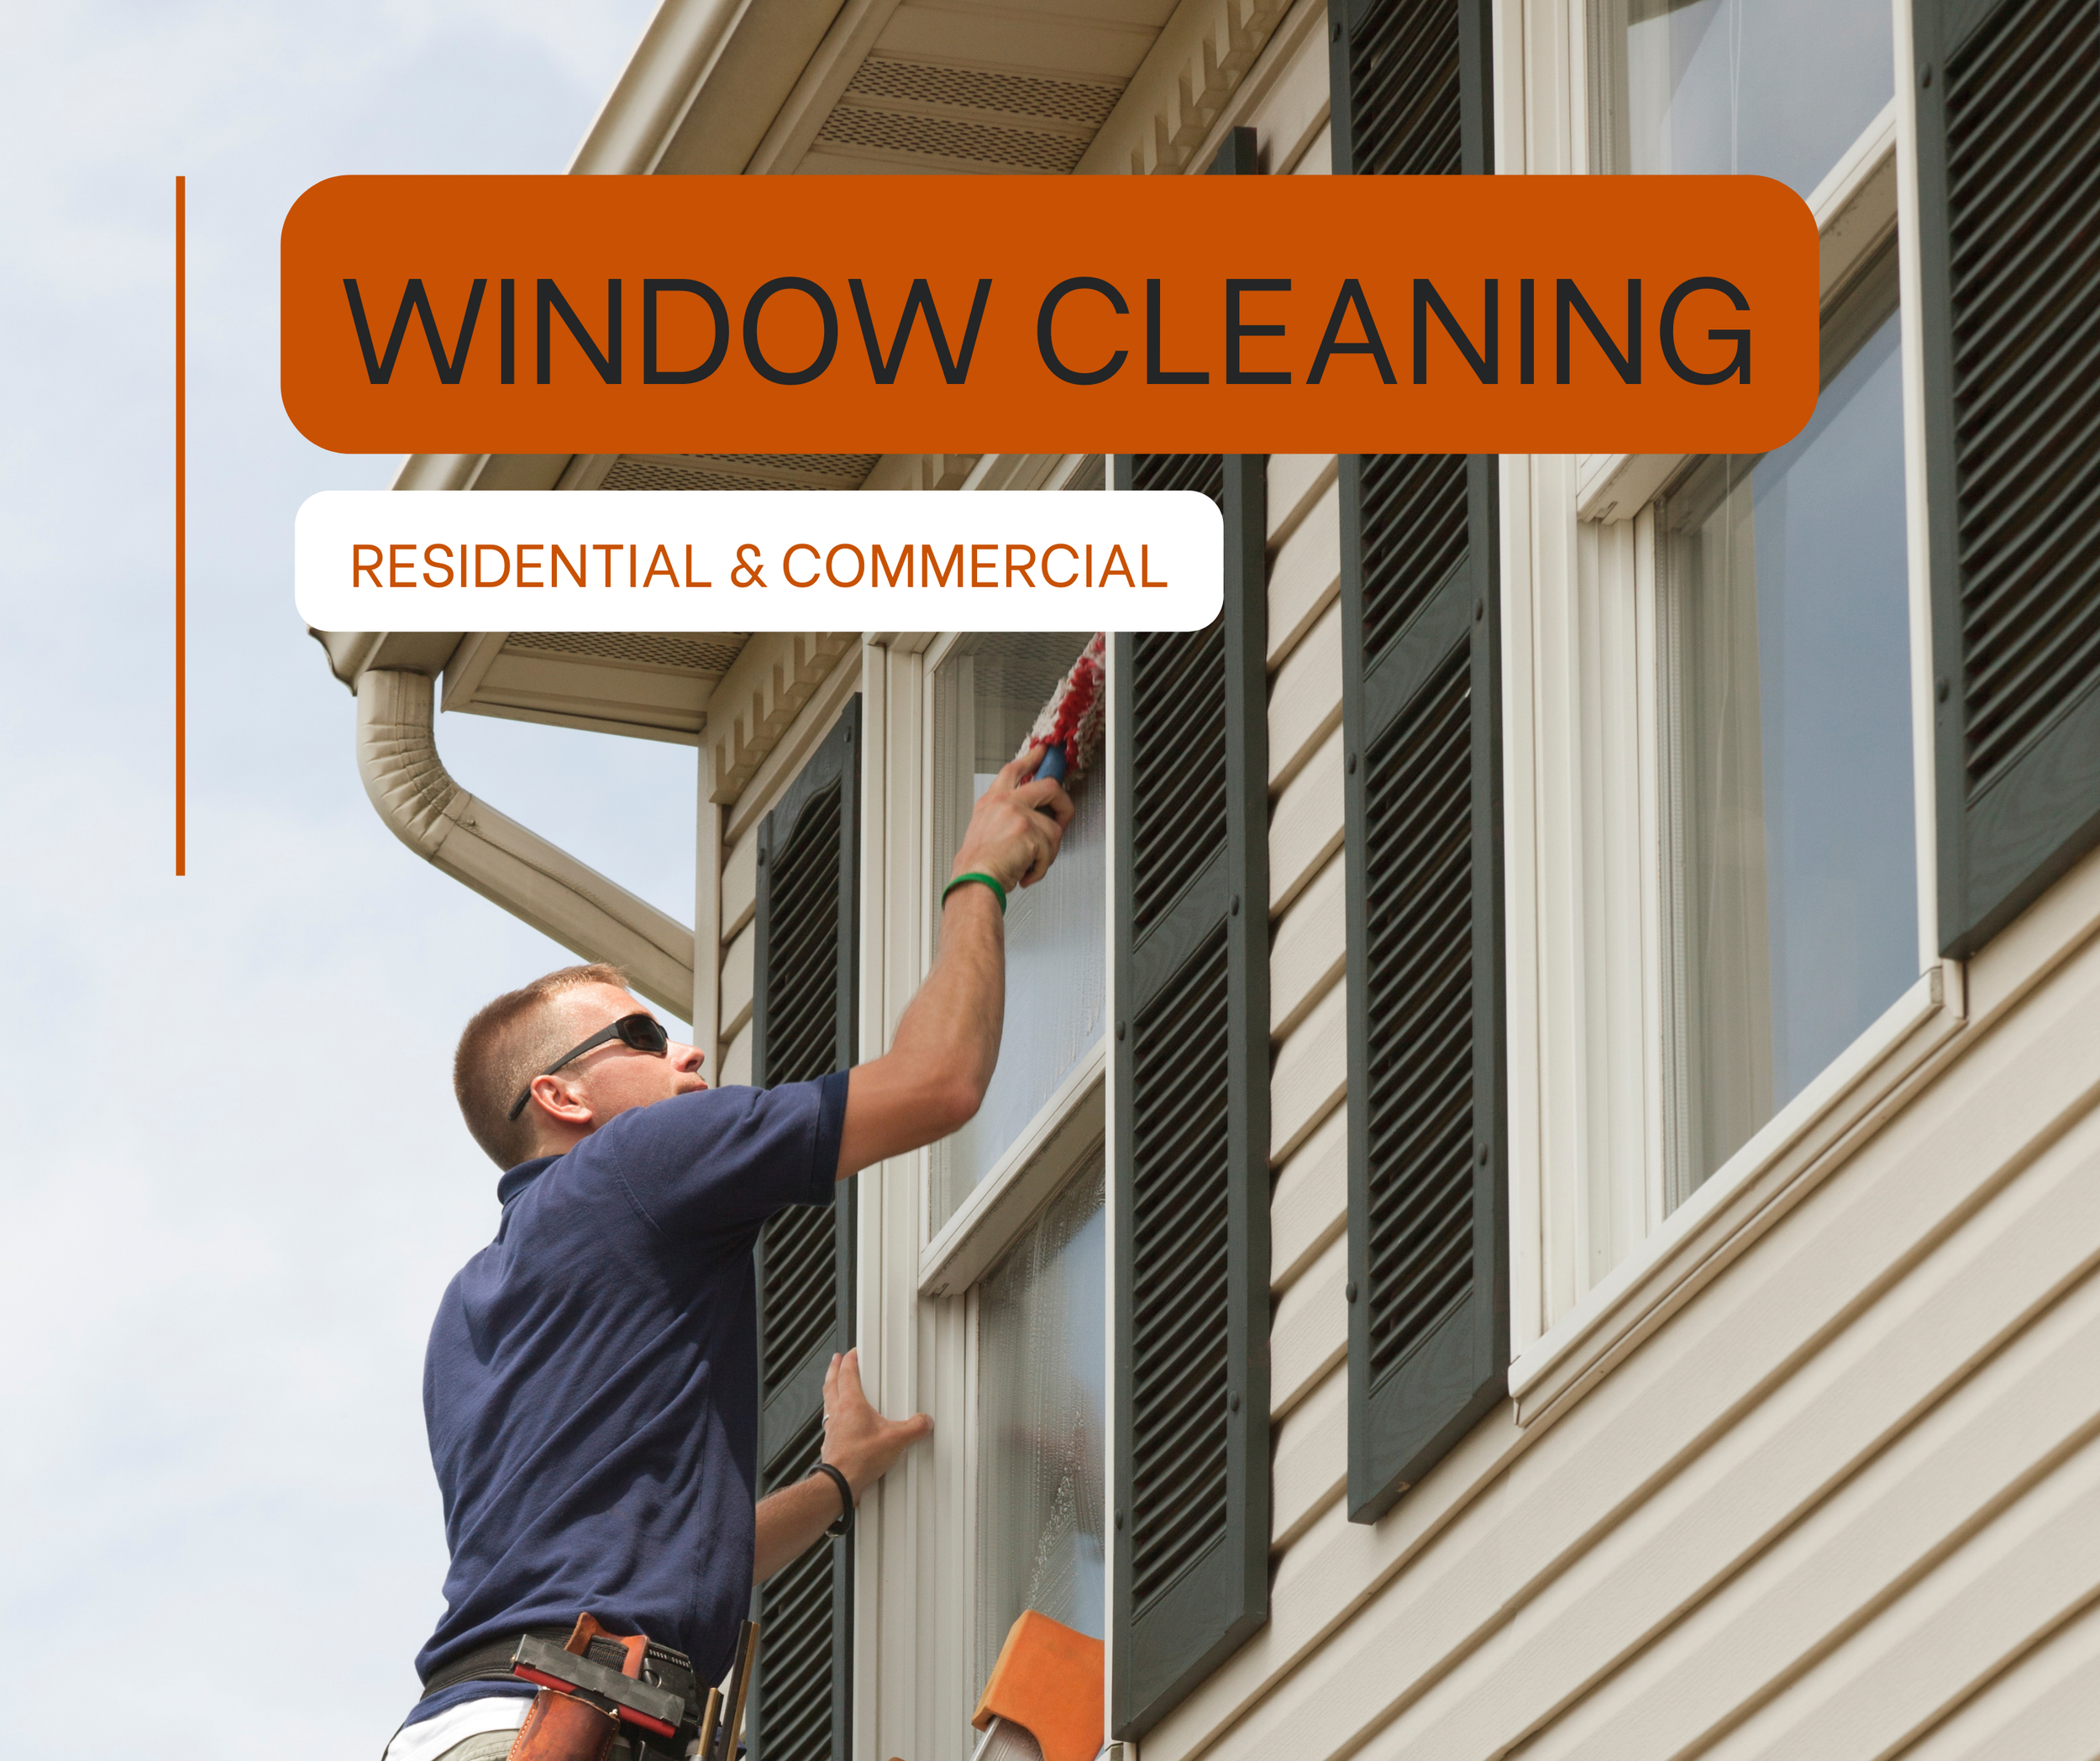 How To Price Window Cleaning Jobs (Residential & Commercial)